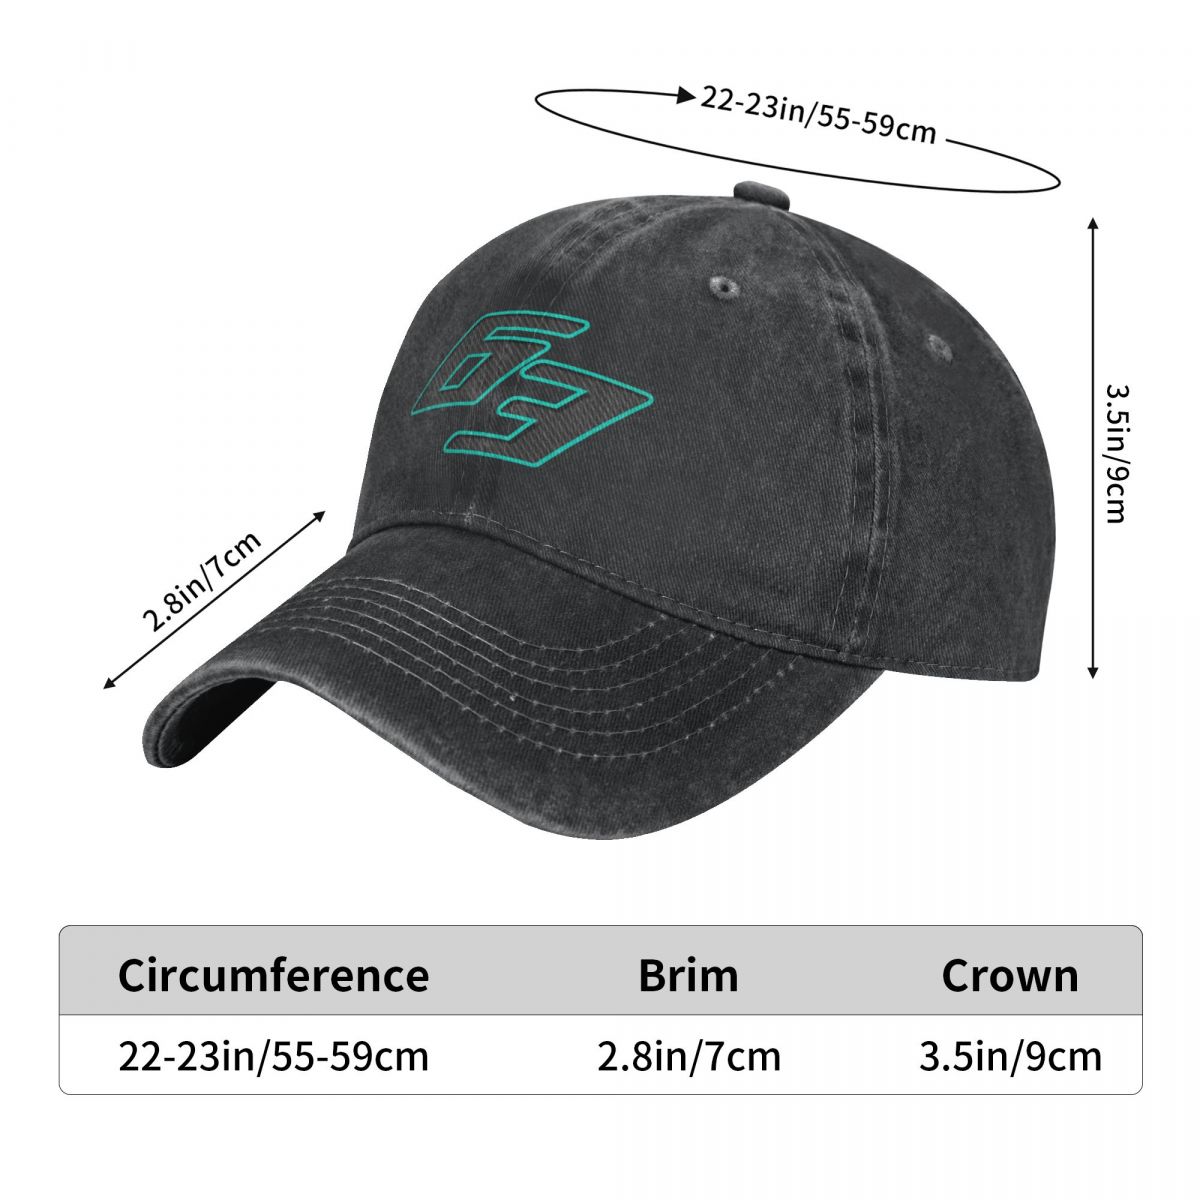 F1 Mercedes AMG No. 63 George Russell - Cap | Best Gift for him or her | Formula 1 Gifts